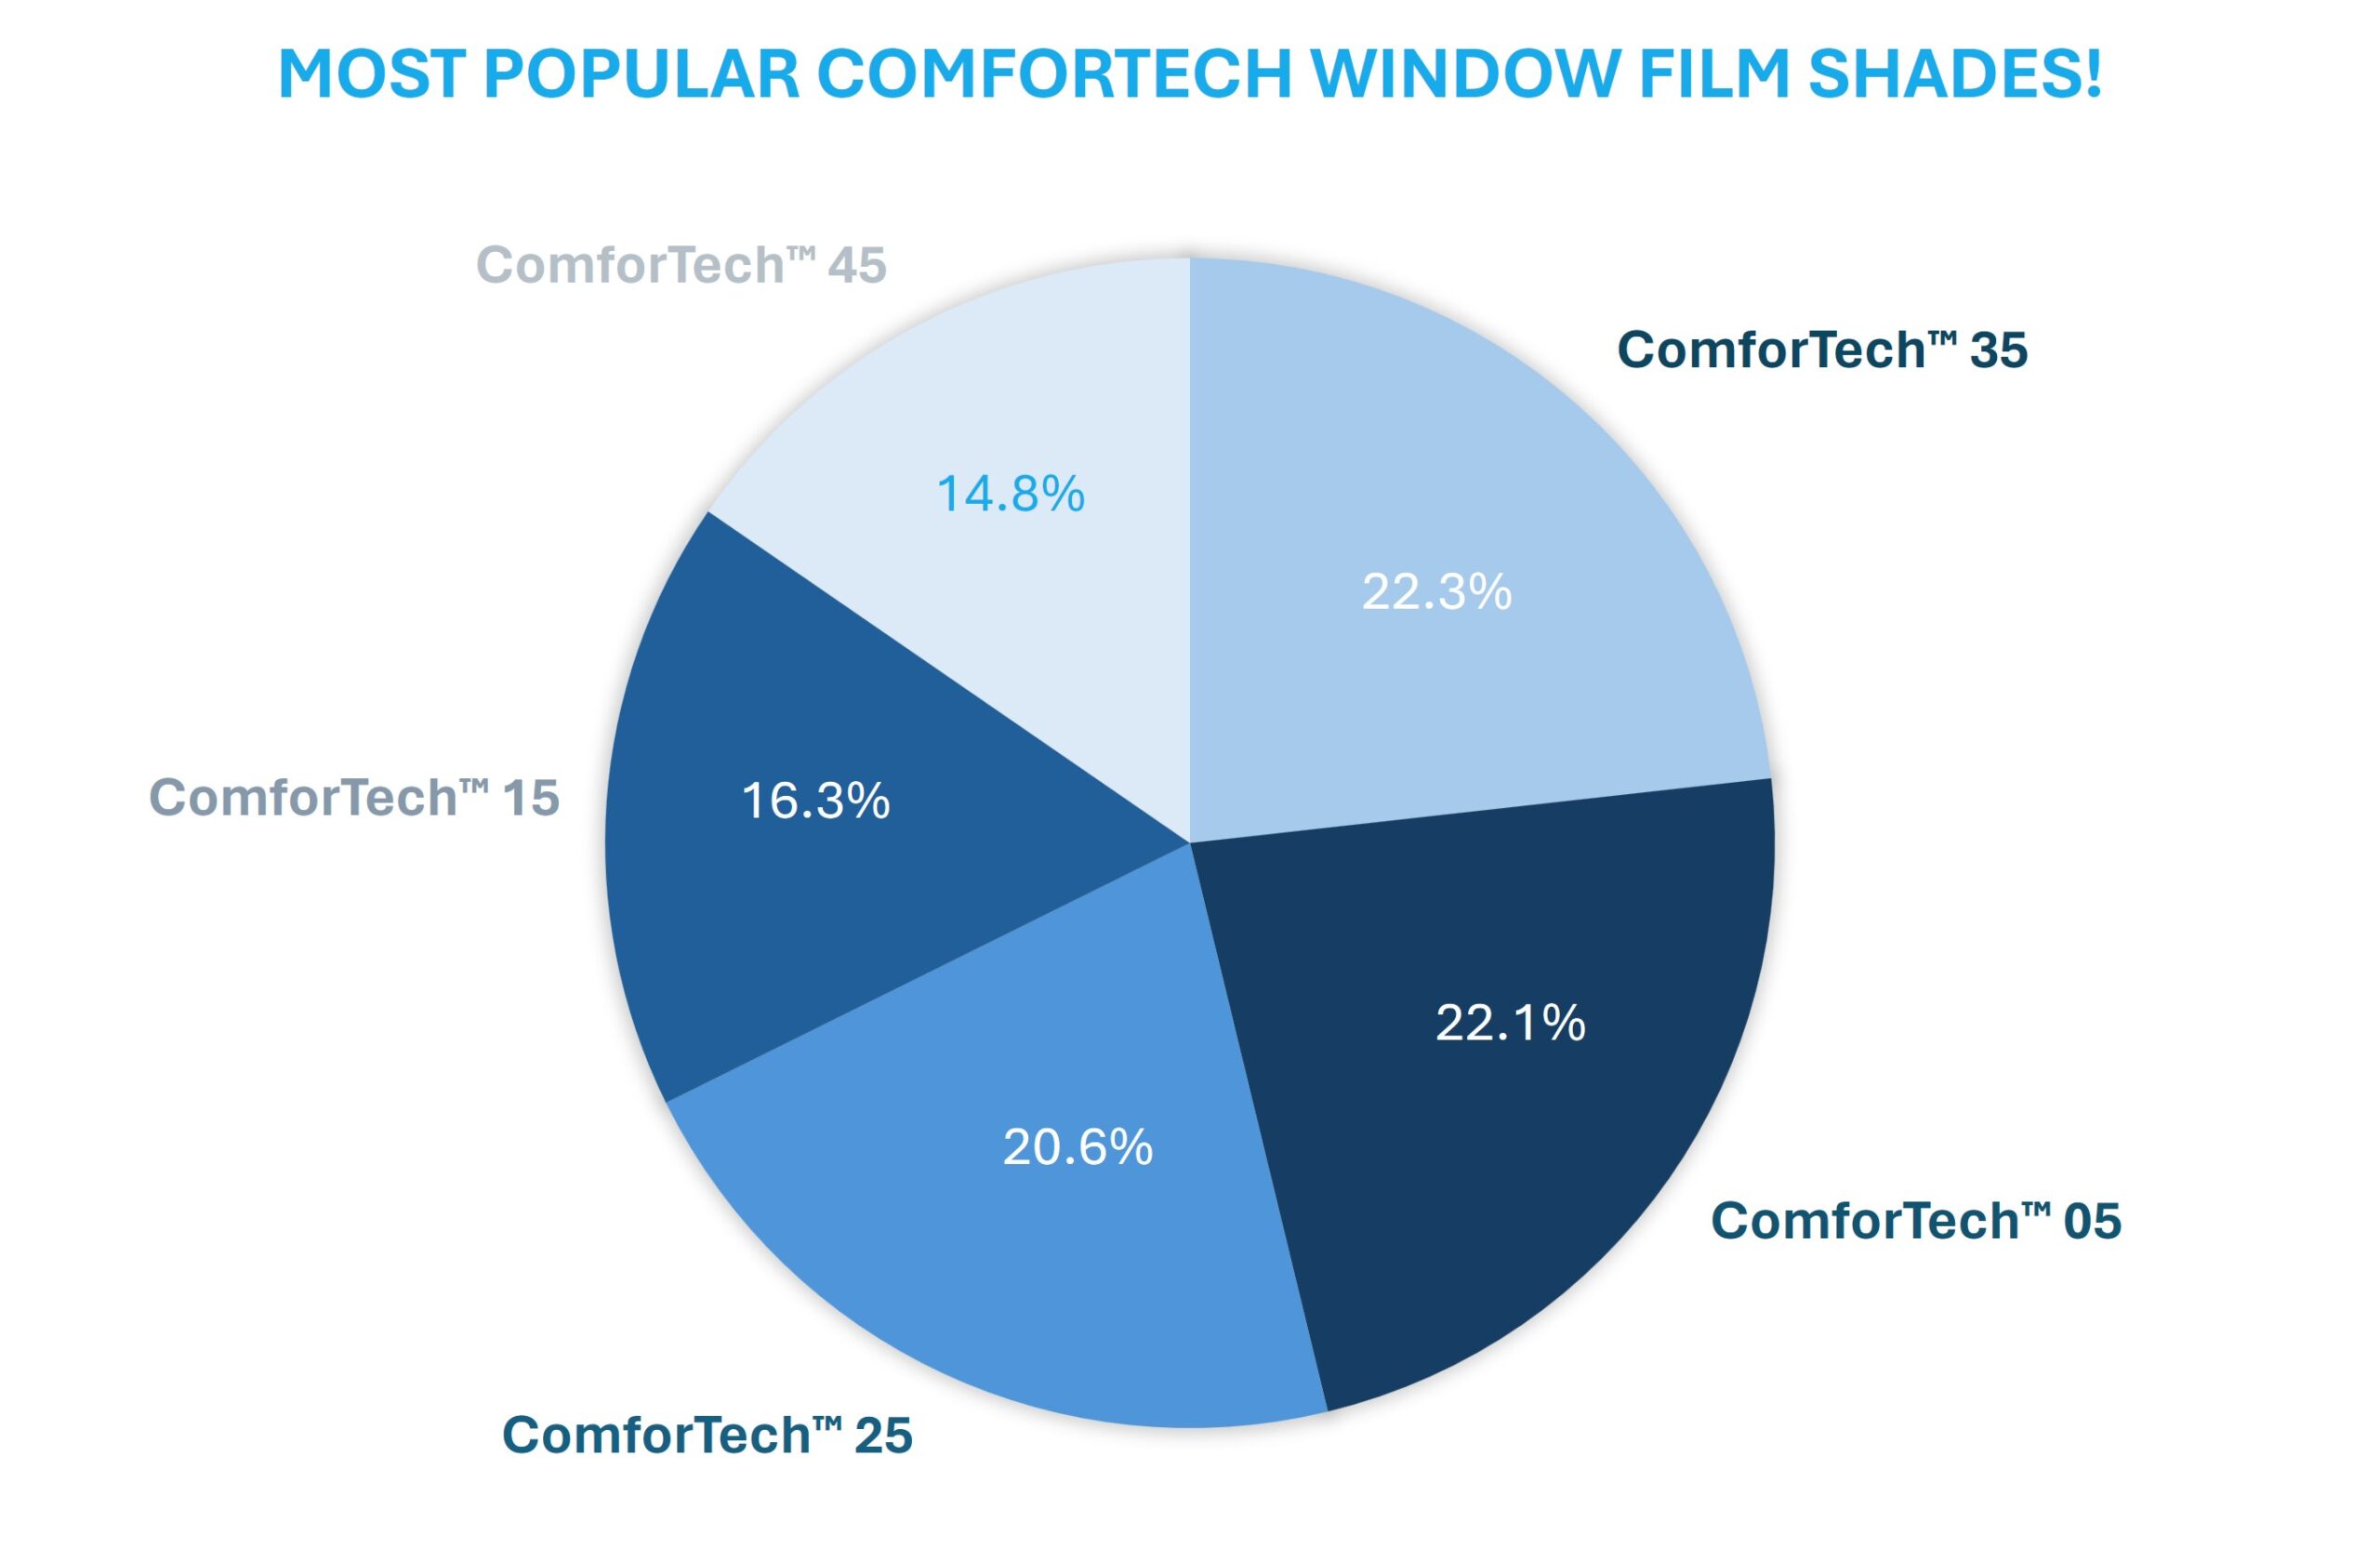 A pie chart showing the most popular window film shades of ComforTech Ceramic Series window film sold on Concord Window Film (www.windowfilm.com).